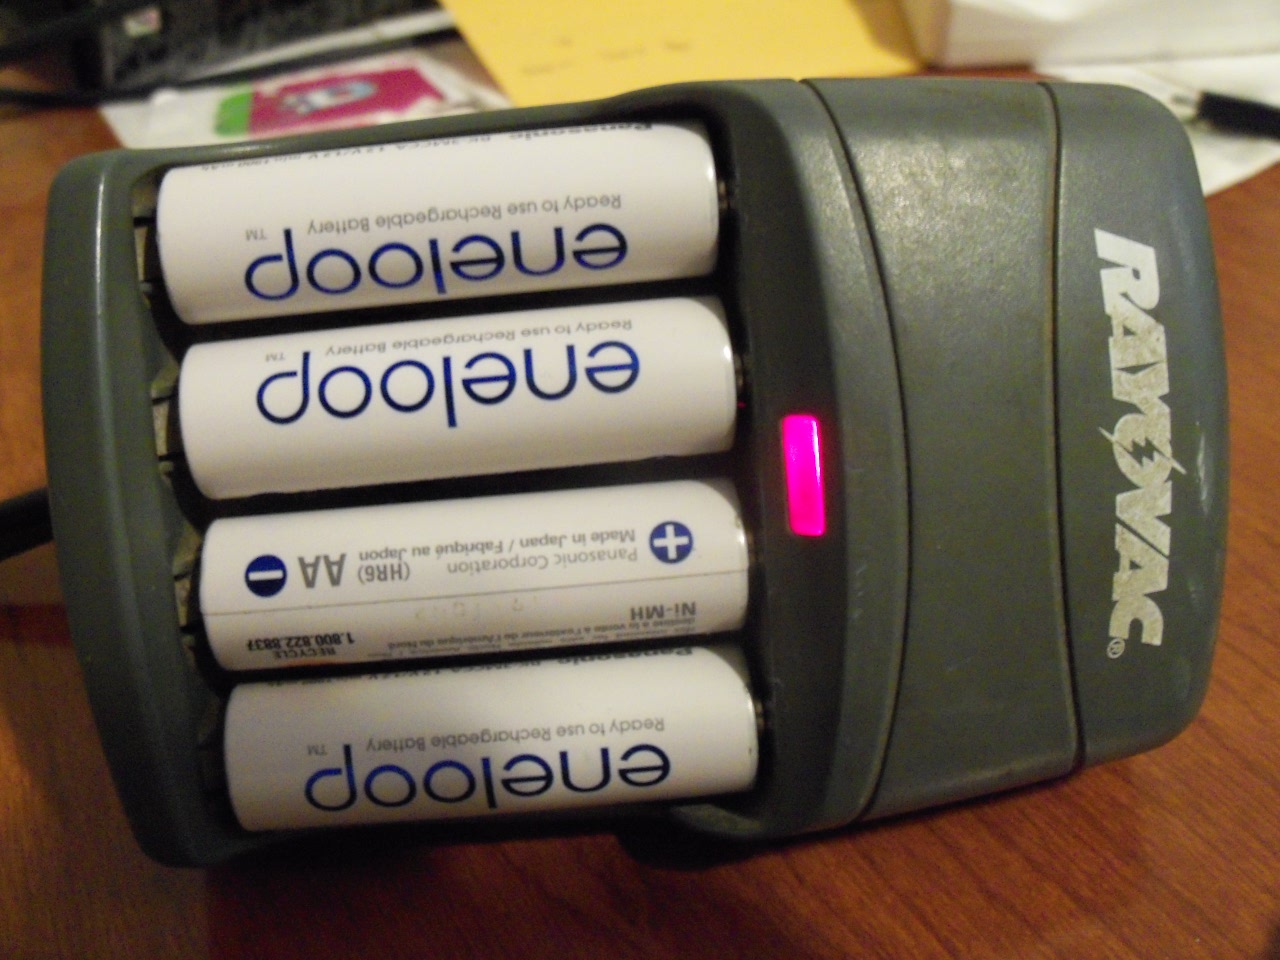 Are rechargeable batteries suppose to last longer than 18 months?